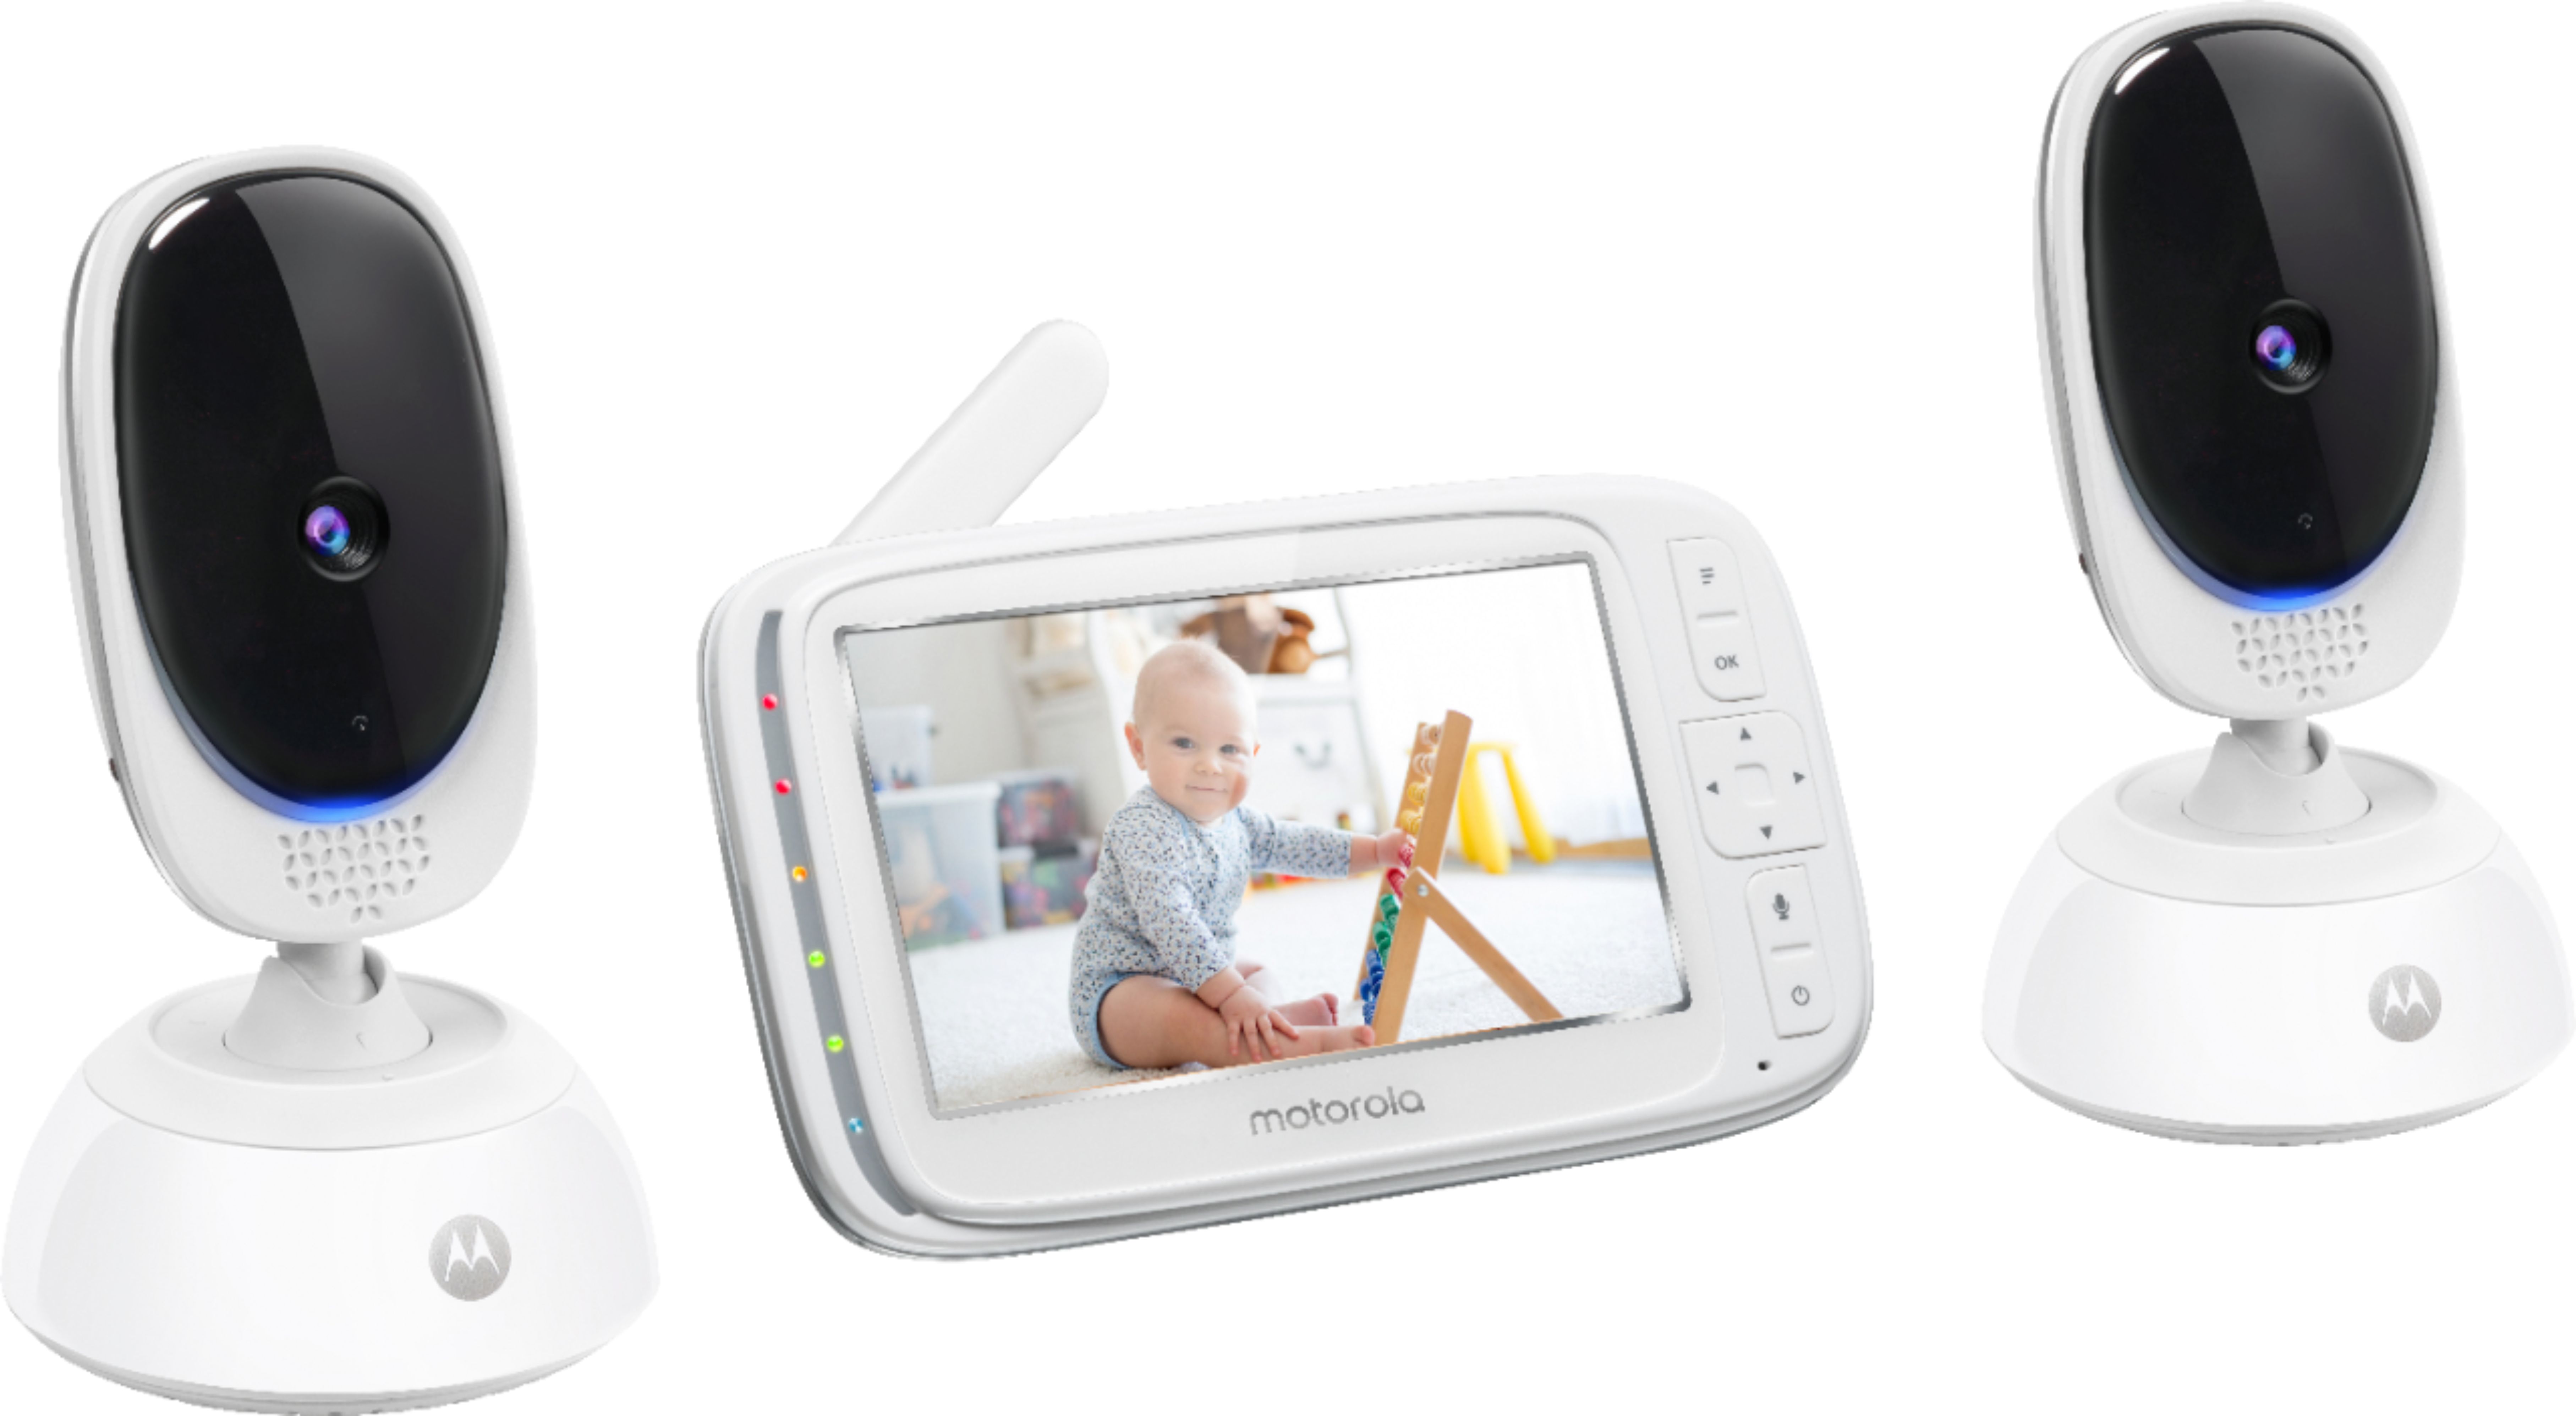 Logisk frugter Diplomati Motorola Video Baby Monitor with 2 cameras and 5" Screen Black/White  COMFORT75-2 - Best Buy